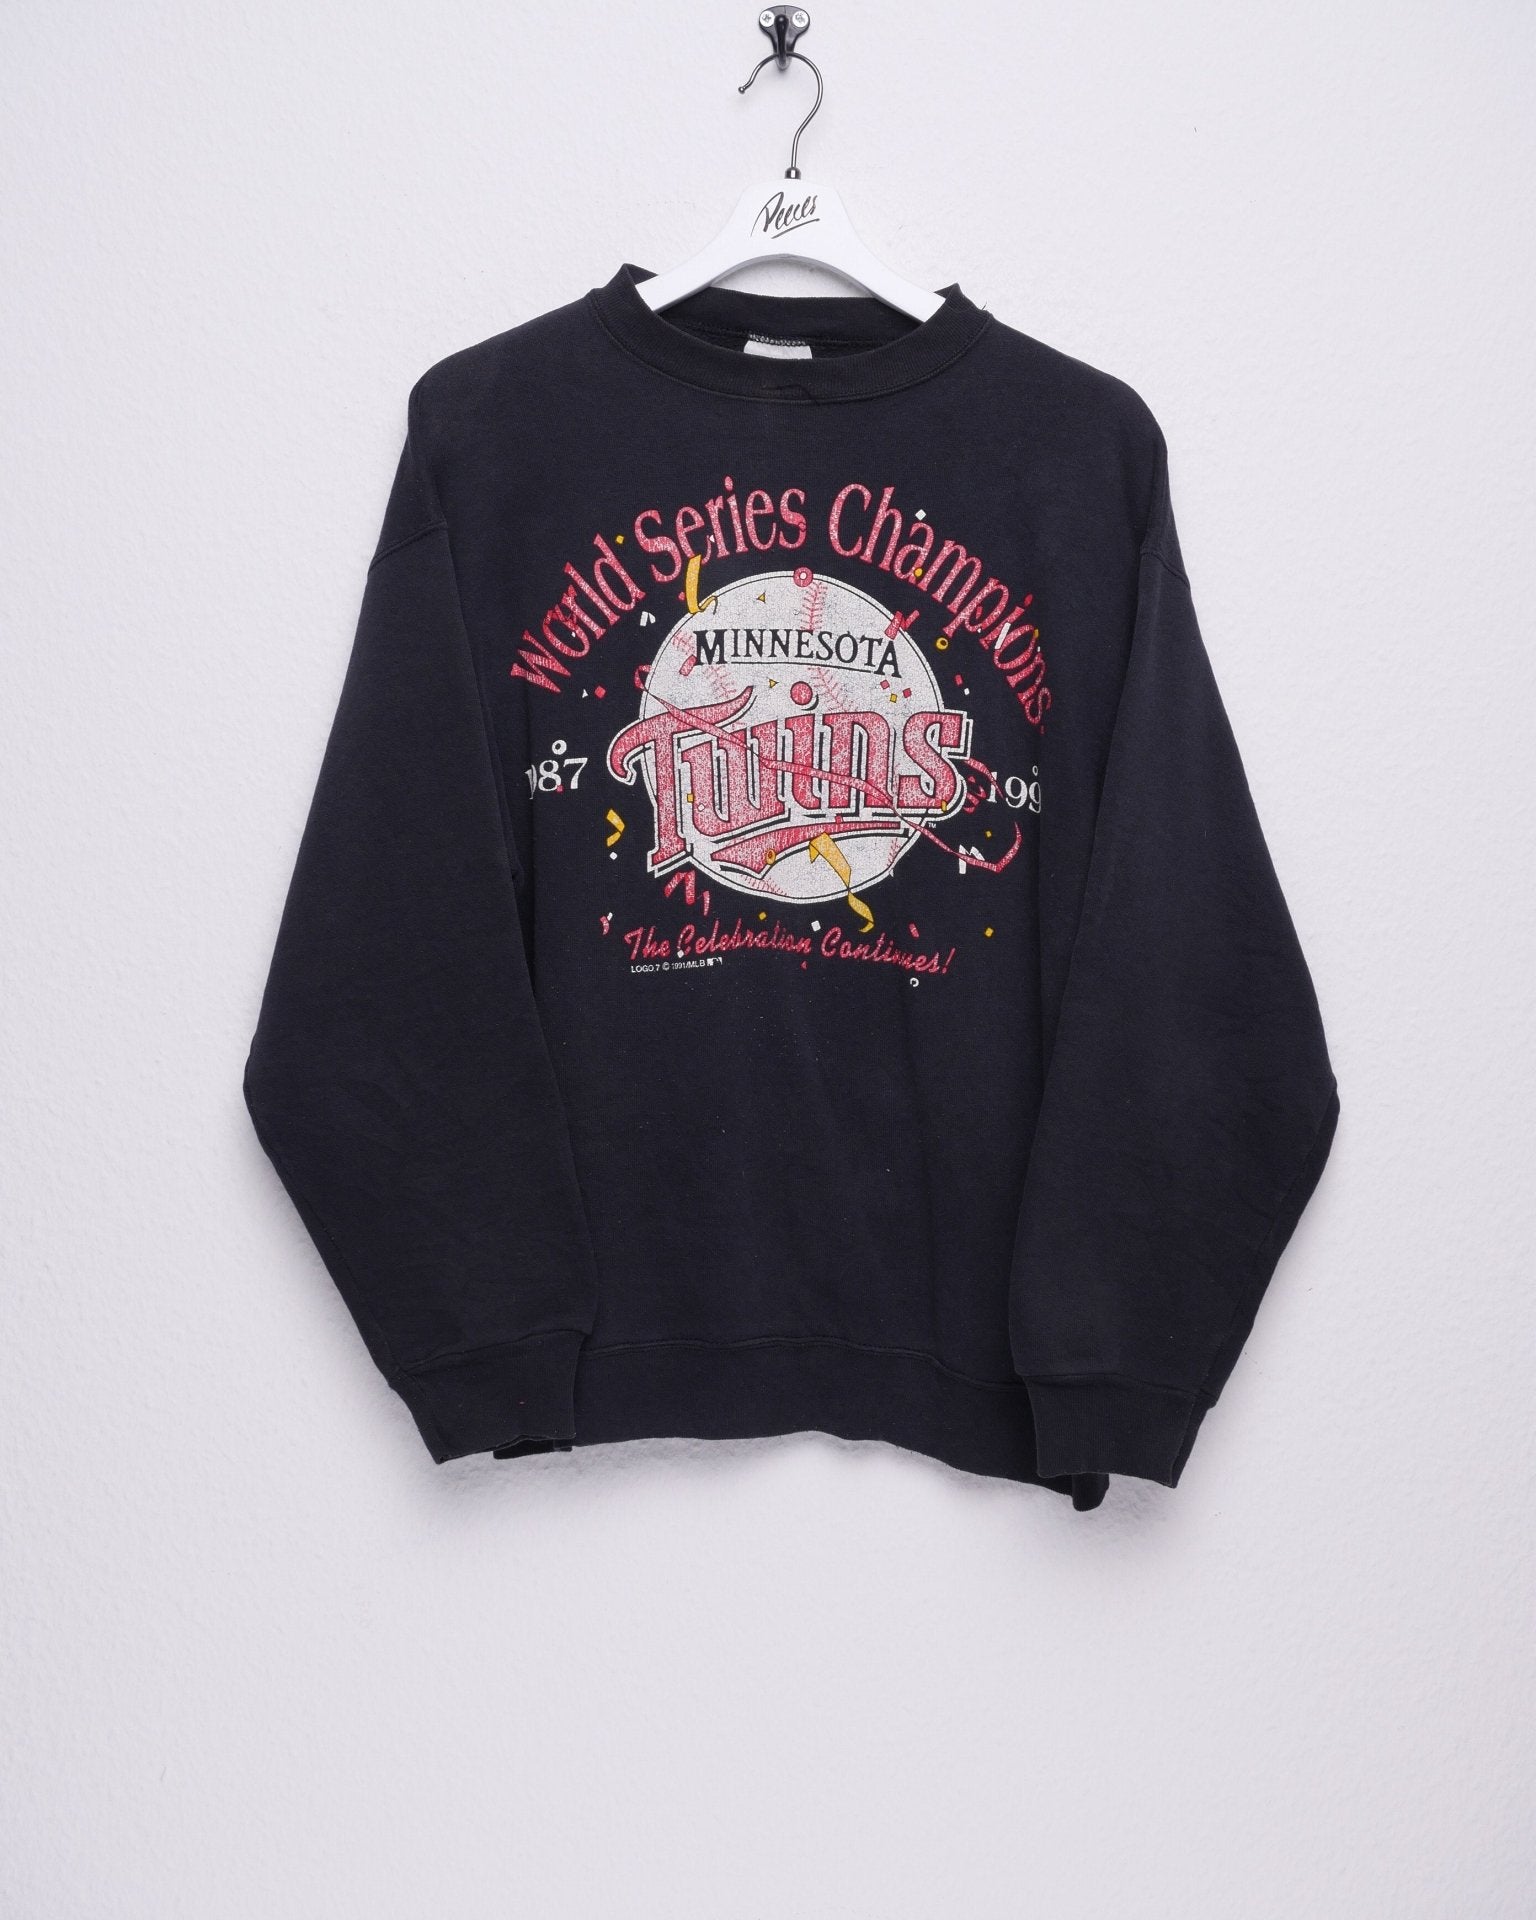 World Series Champions printed Spellout 1991 Vintage Sweater - Peeces